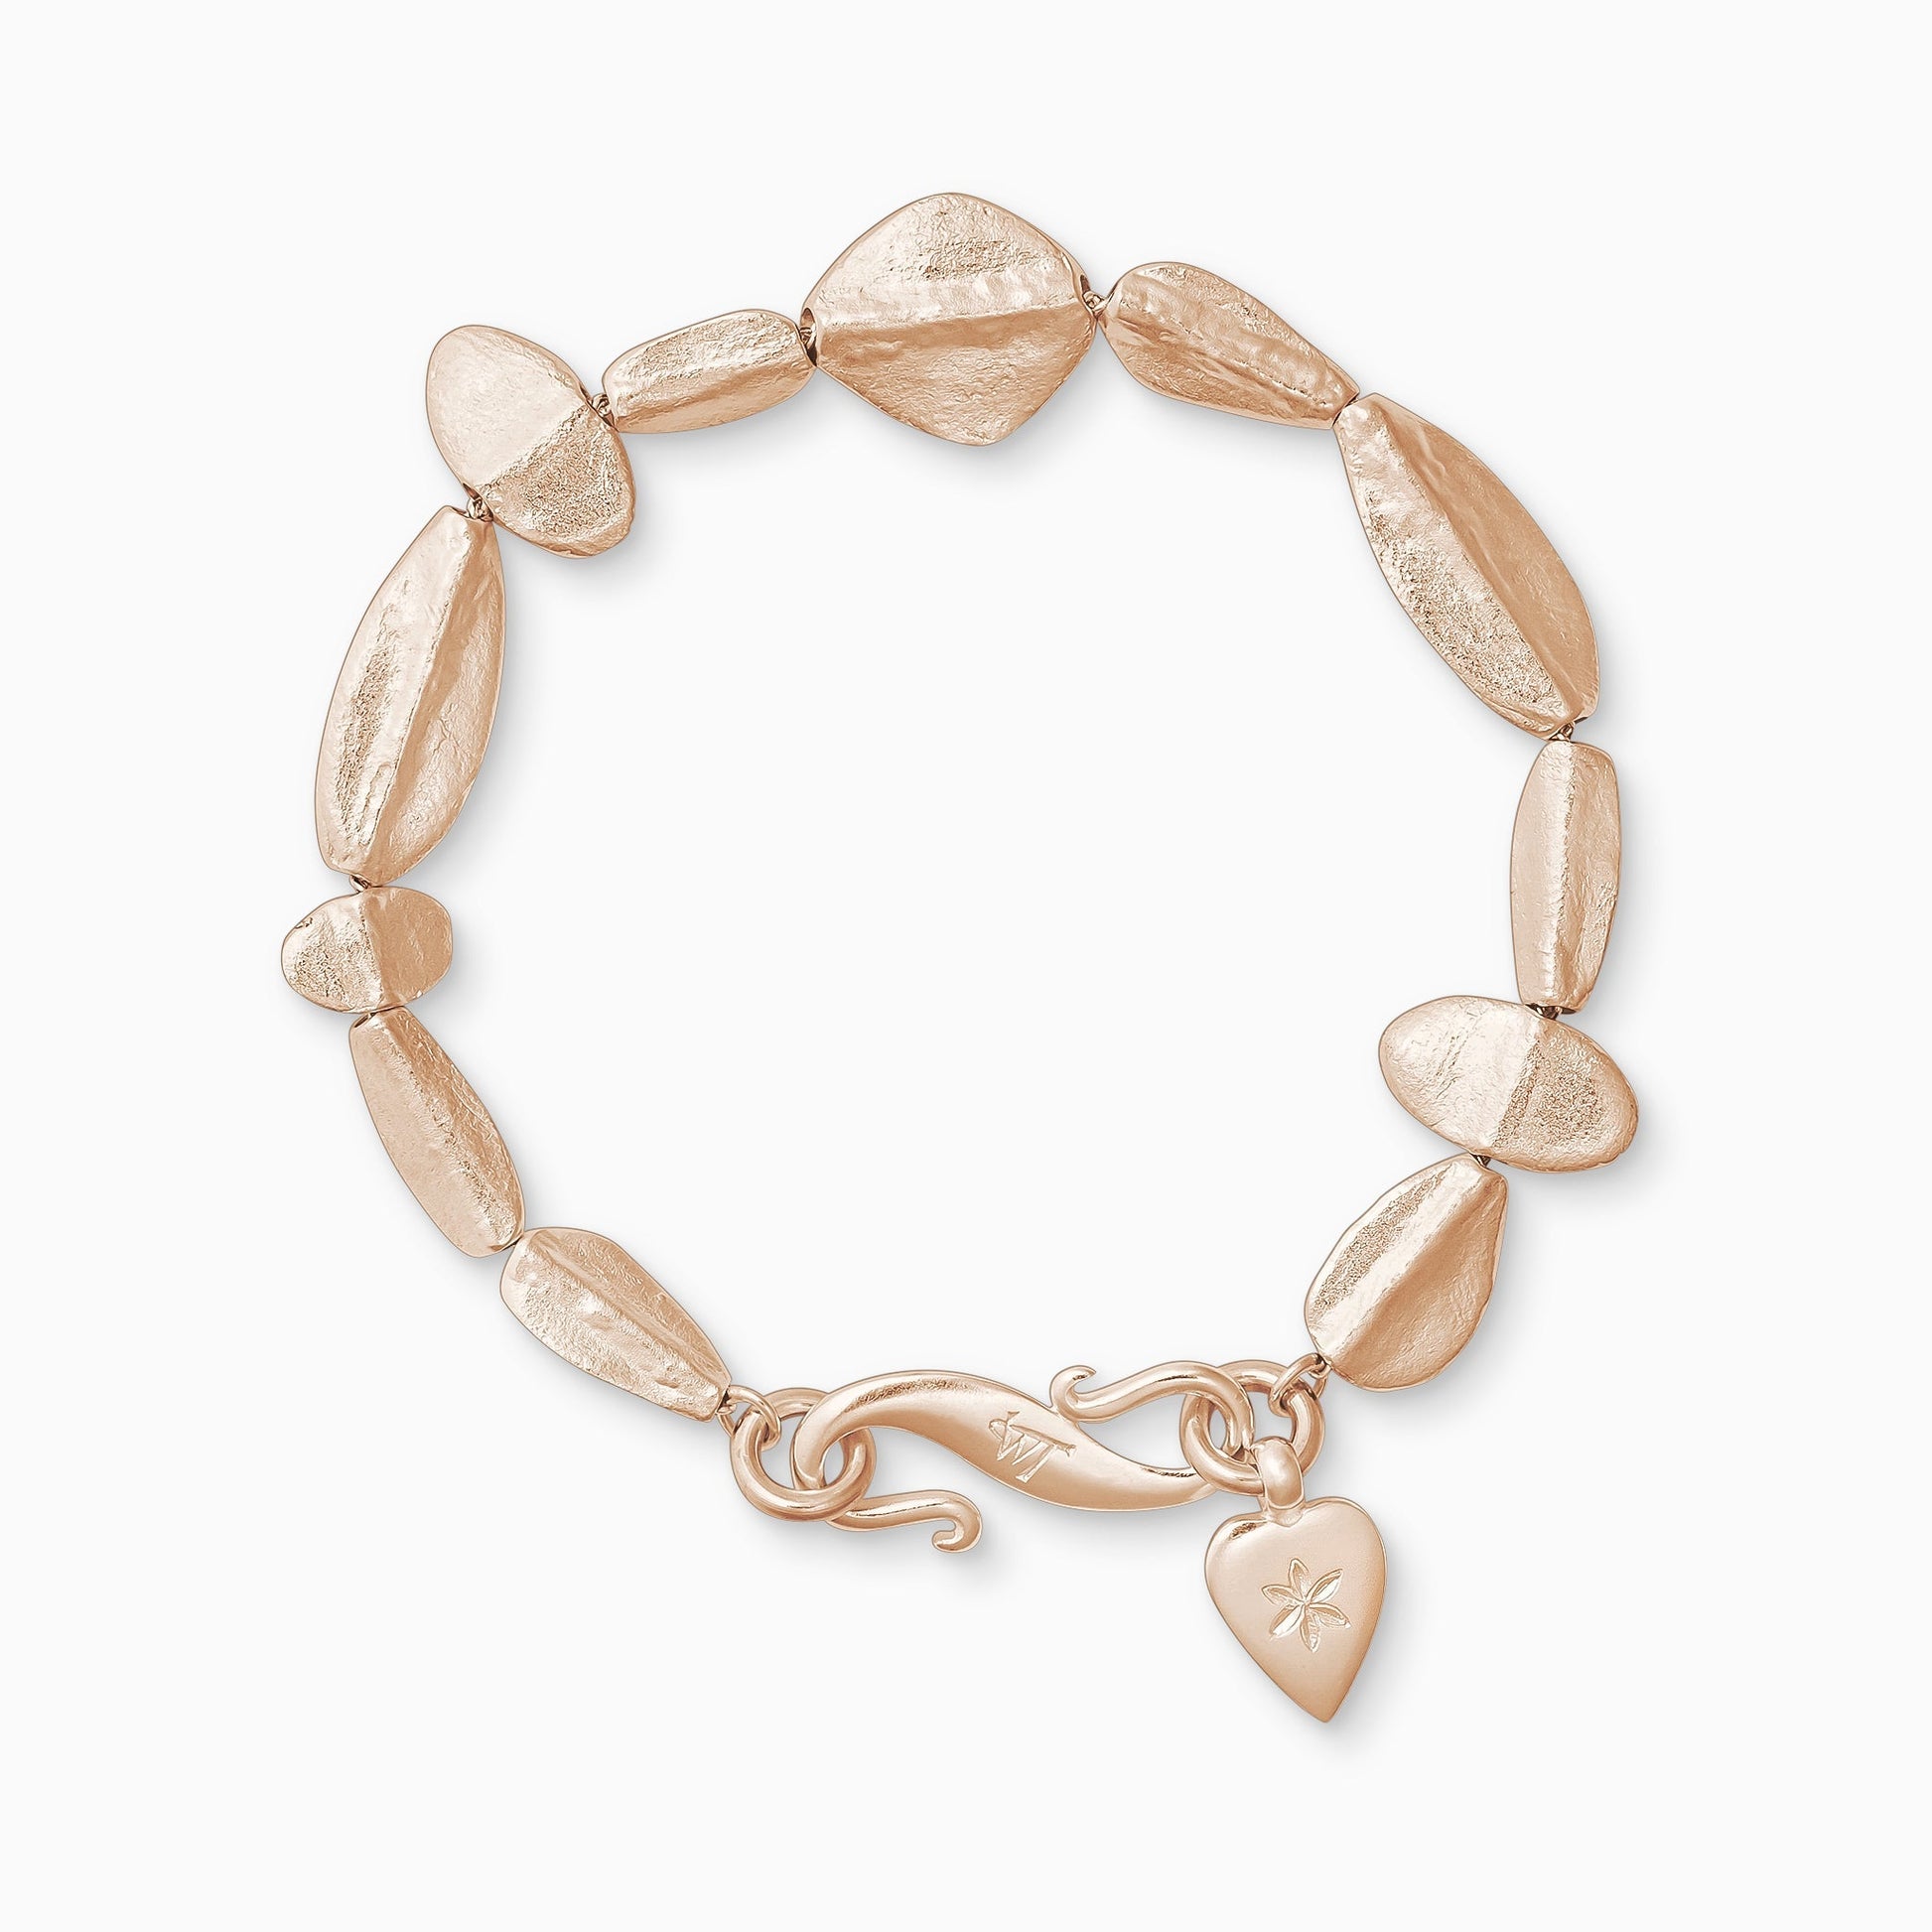 An 18ct Fairtrade rose gold bracelet of handmade textured beads with a central ridge.  Finished with a smooth heart shaped charm engraved with a 6 petal flower and our signature ’S’ clasp. Bracelet length 210mm.. Beads varying sizes from 11mm x 6mm to 35mm x 15mm.